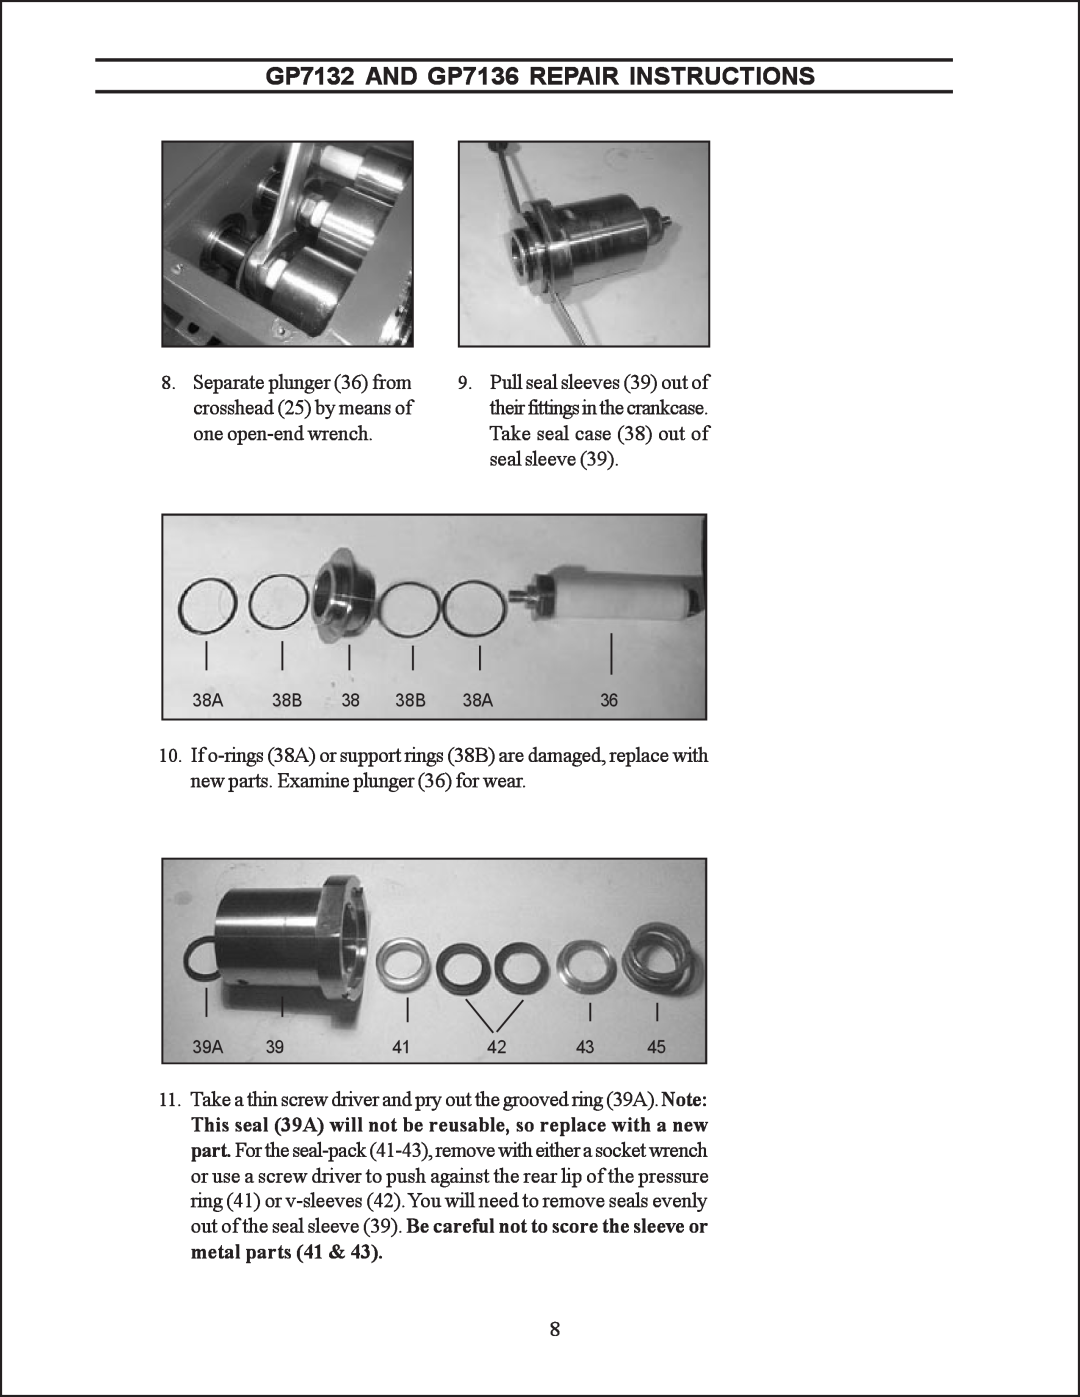 Giant GP7132 AND GP7136 REPAIR INSTRUCTIONS, Take a thin screw driver and pry out the grooved ring 39A.Note 